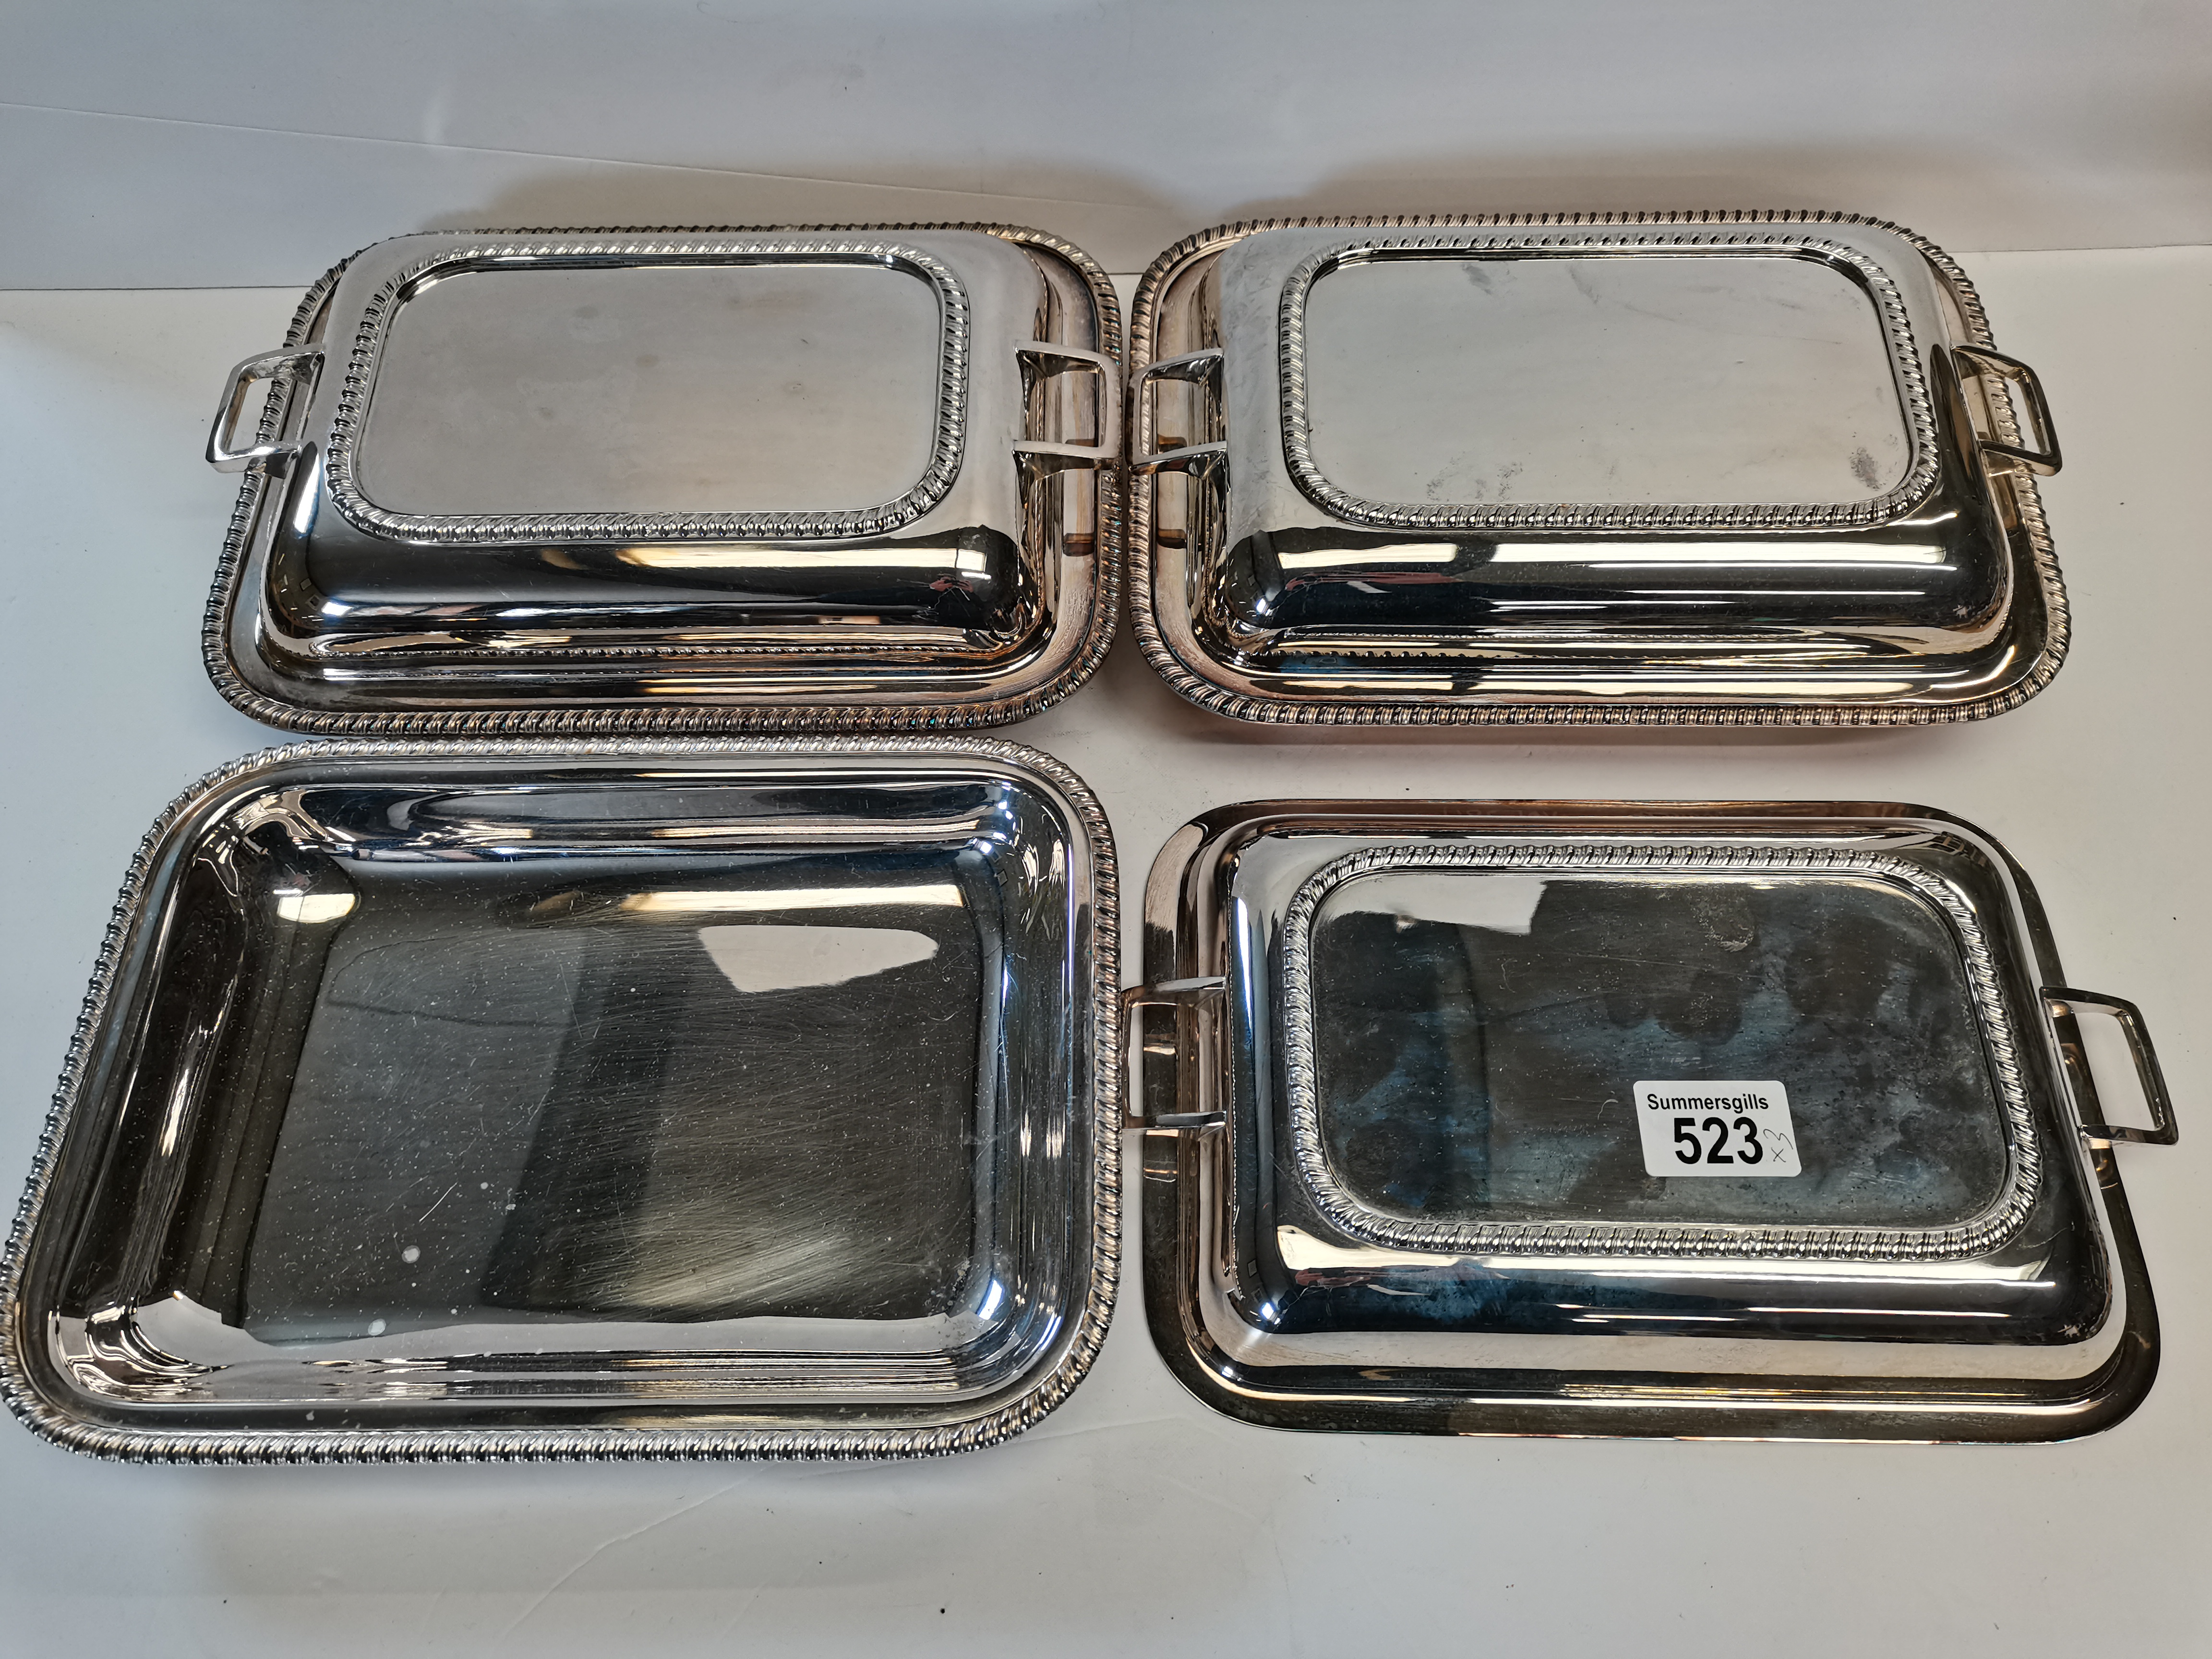 X3 plated Entrée dishes - Image 2 of 4